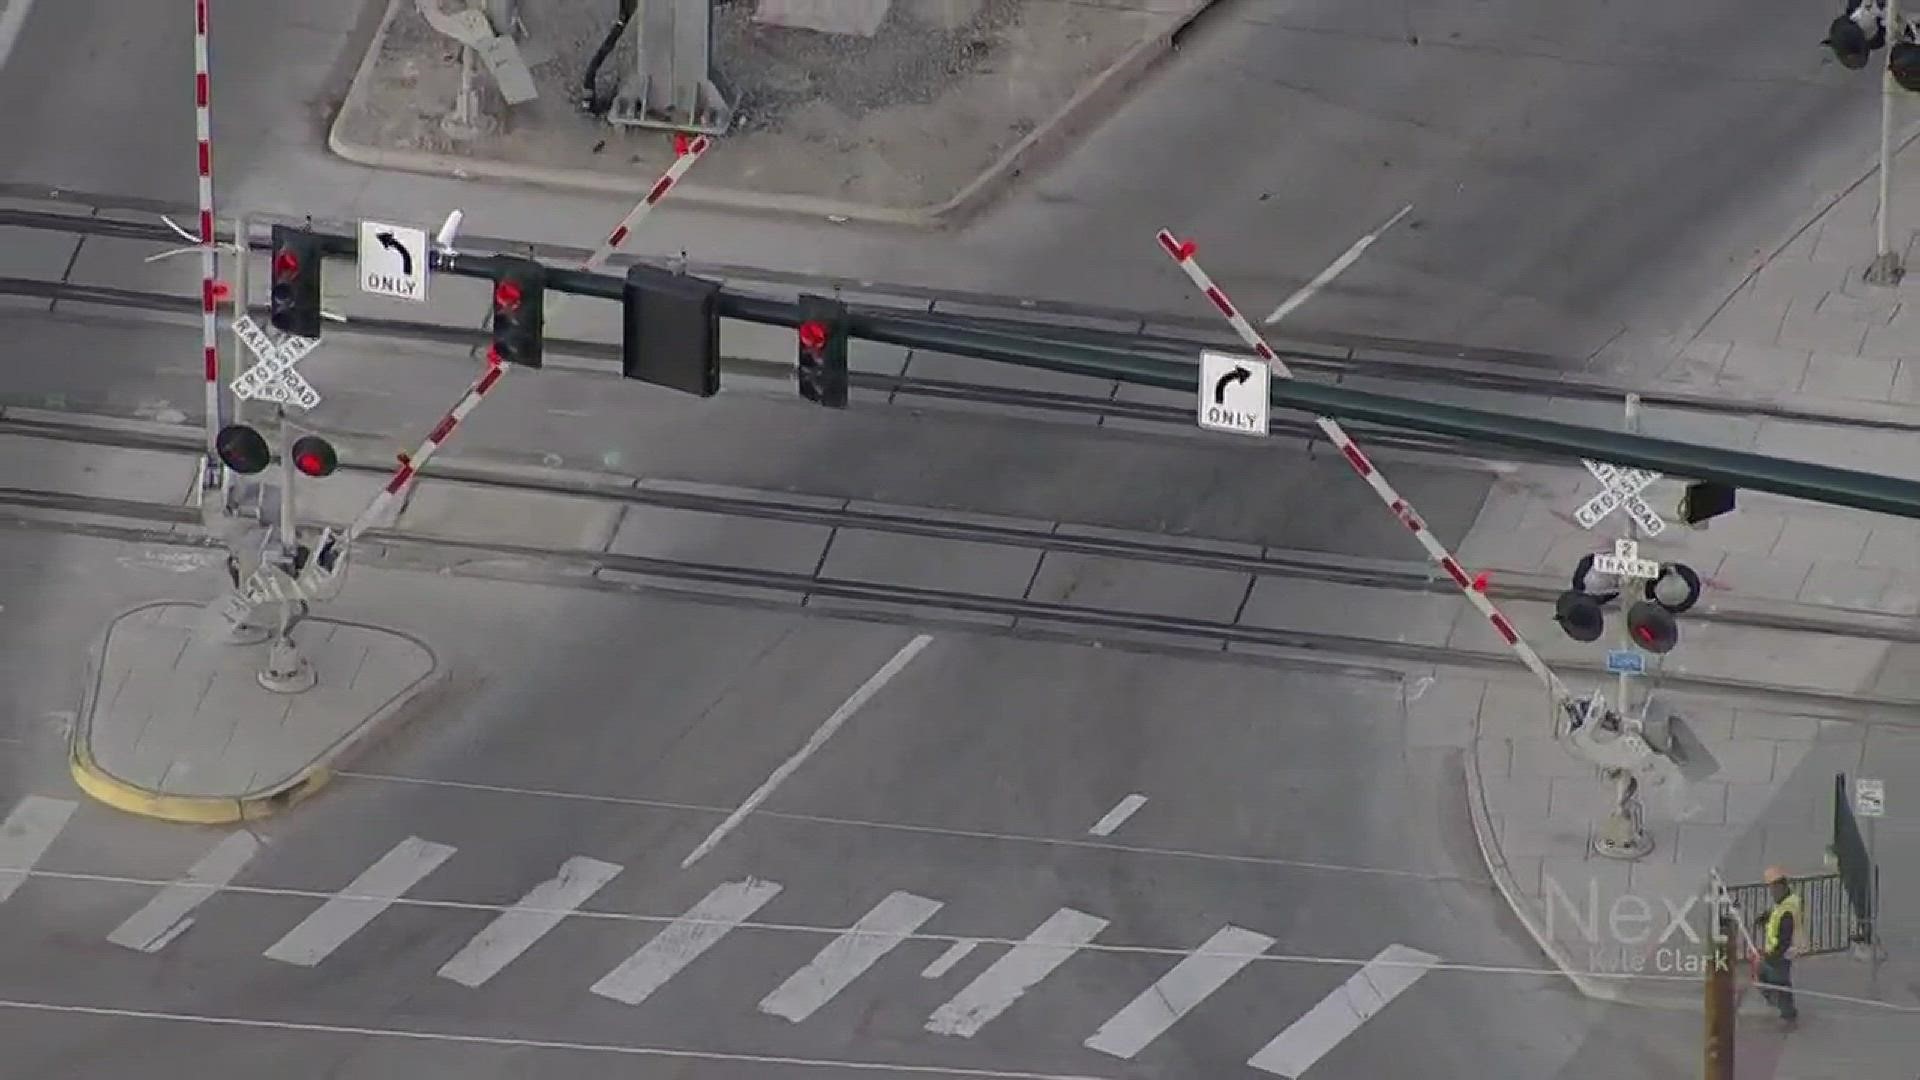 RTD says it will meet a deadline set by federal regulators to submit a plan detailing what is being done to fix the crossing gates on the A Line -- something that has plagued the commuter rail from Union Station to DIA since it opened in 2016.